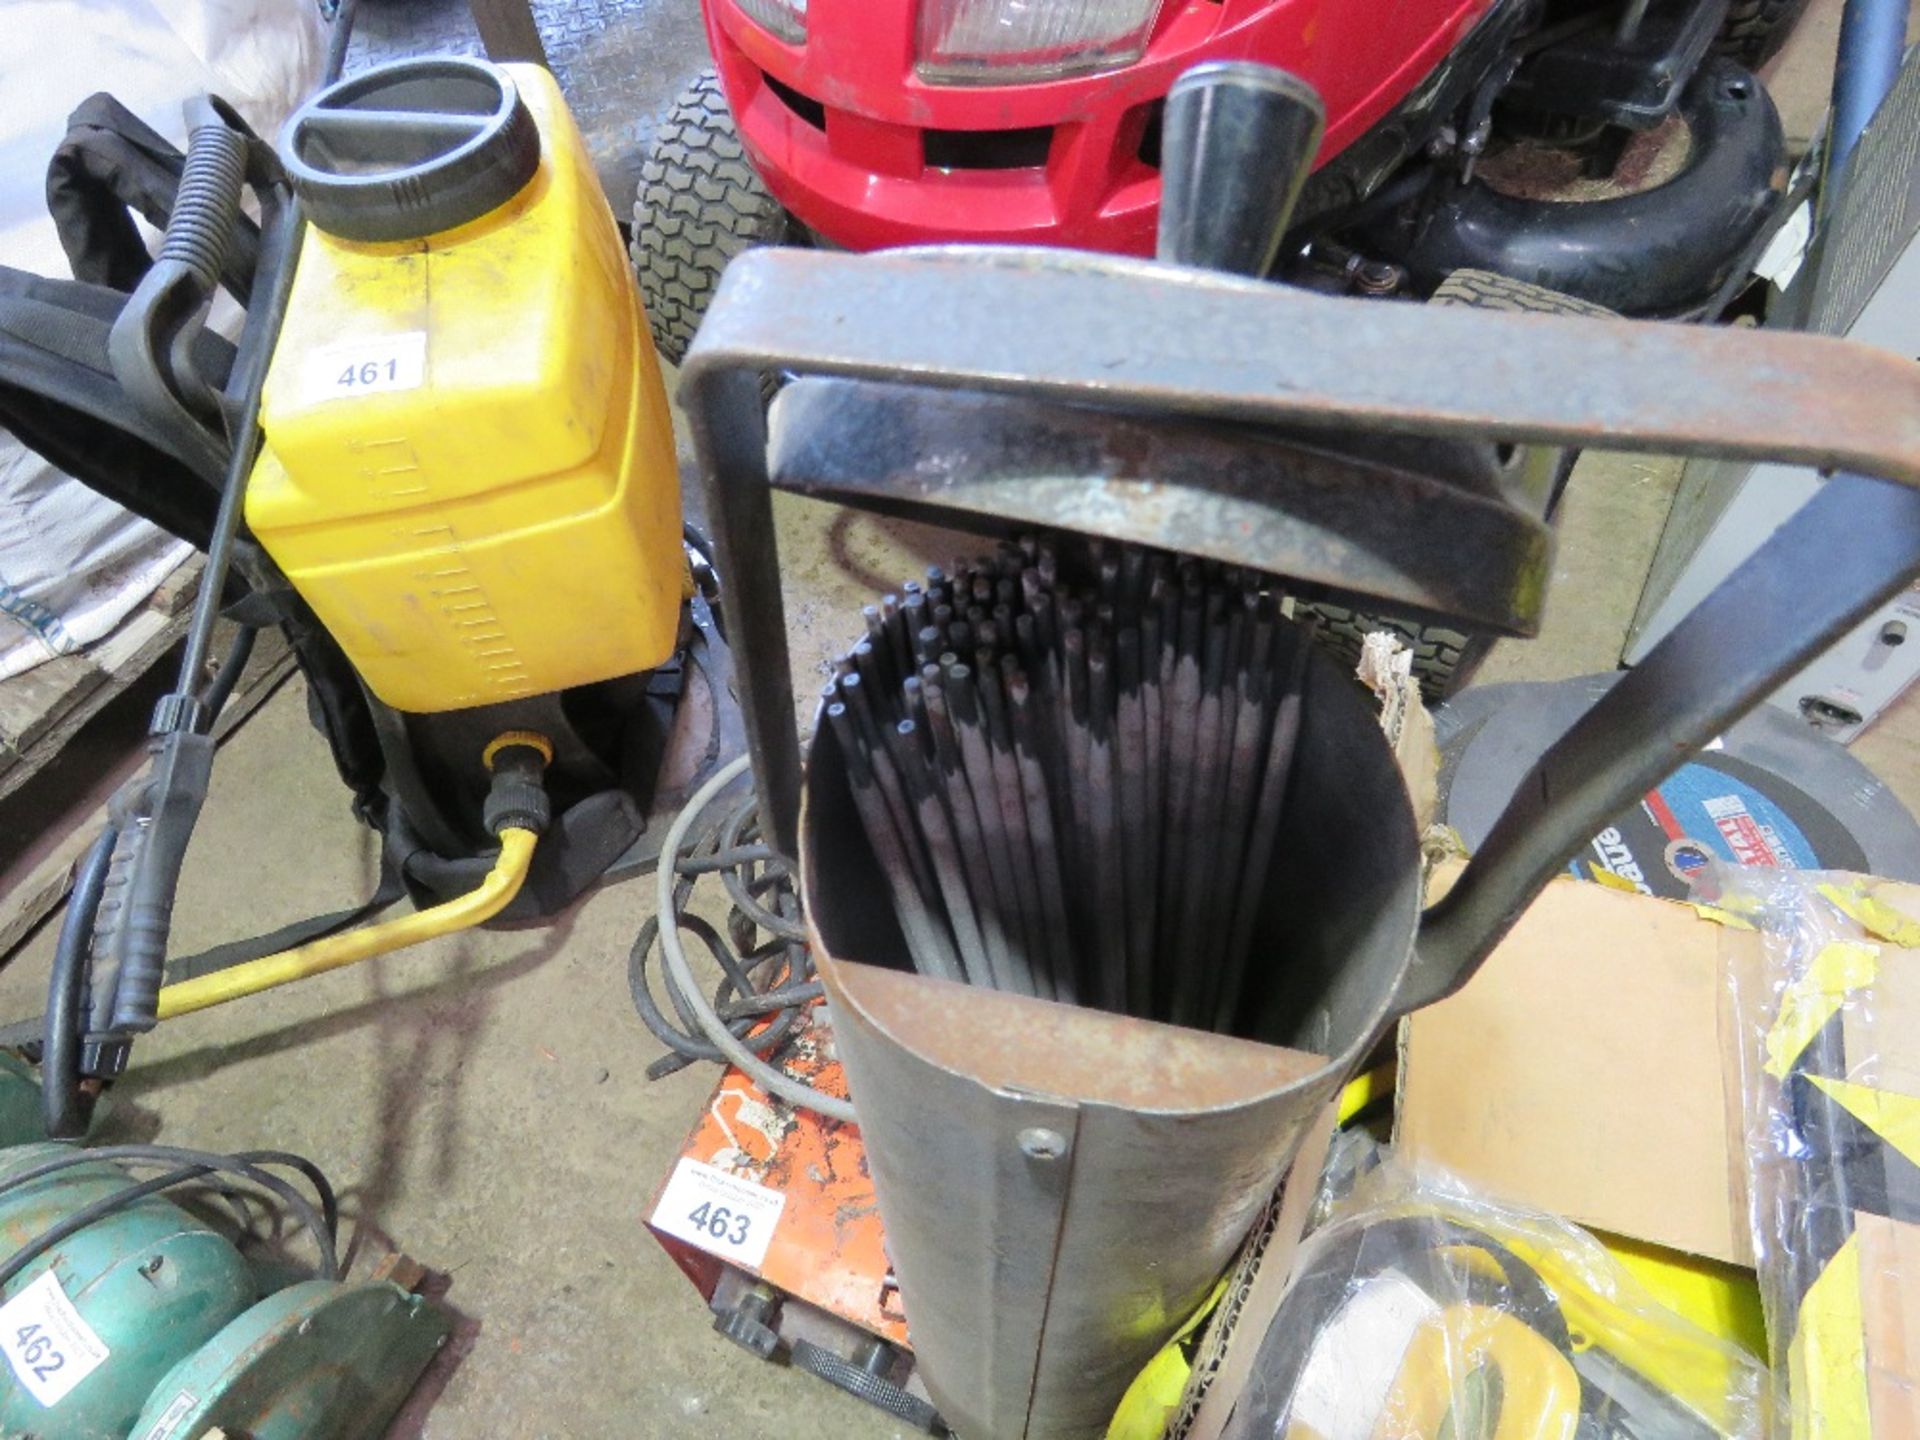 ELECTRIC ARC WELDER, 240VOLT PLUS A 110VOLT ROD DRIER. SOURCED FROM SITE CLOSURE/CLEARANCE. - Image 3 of 4